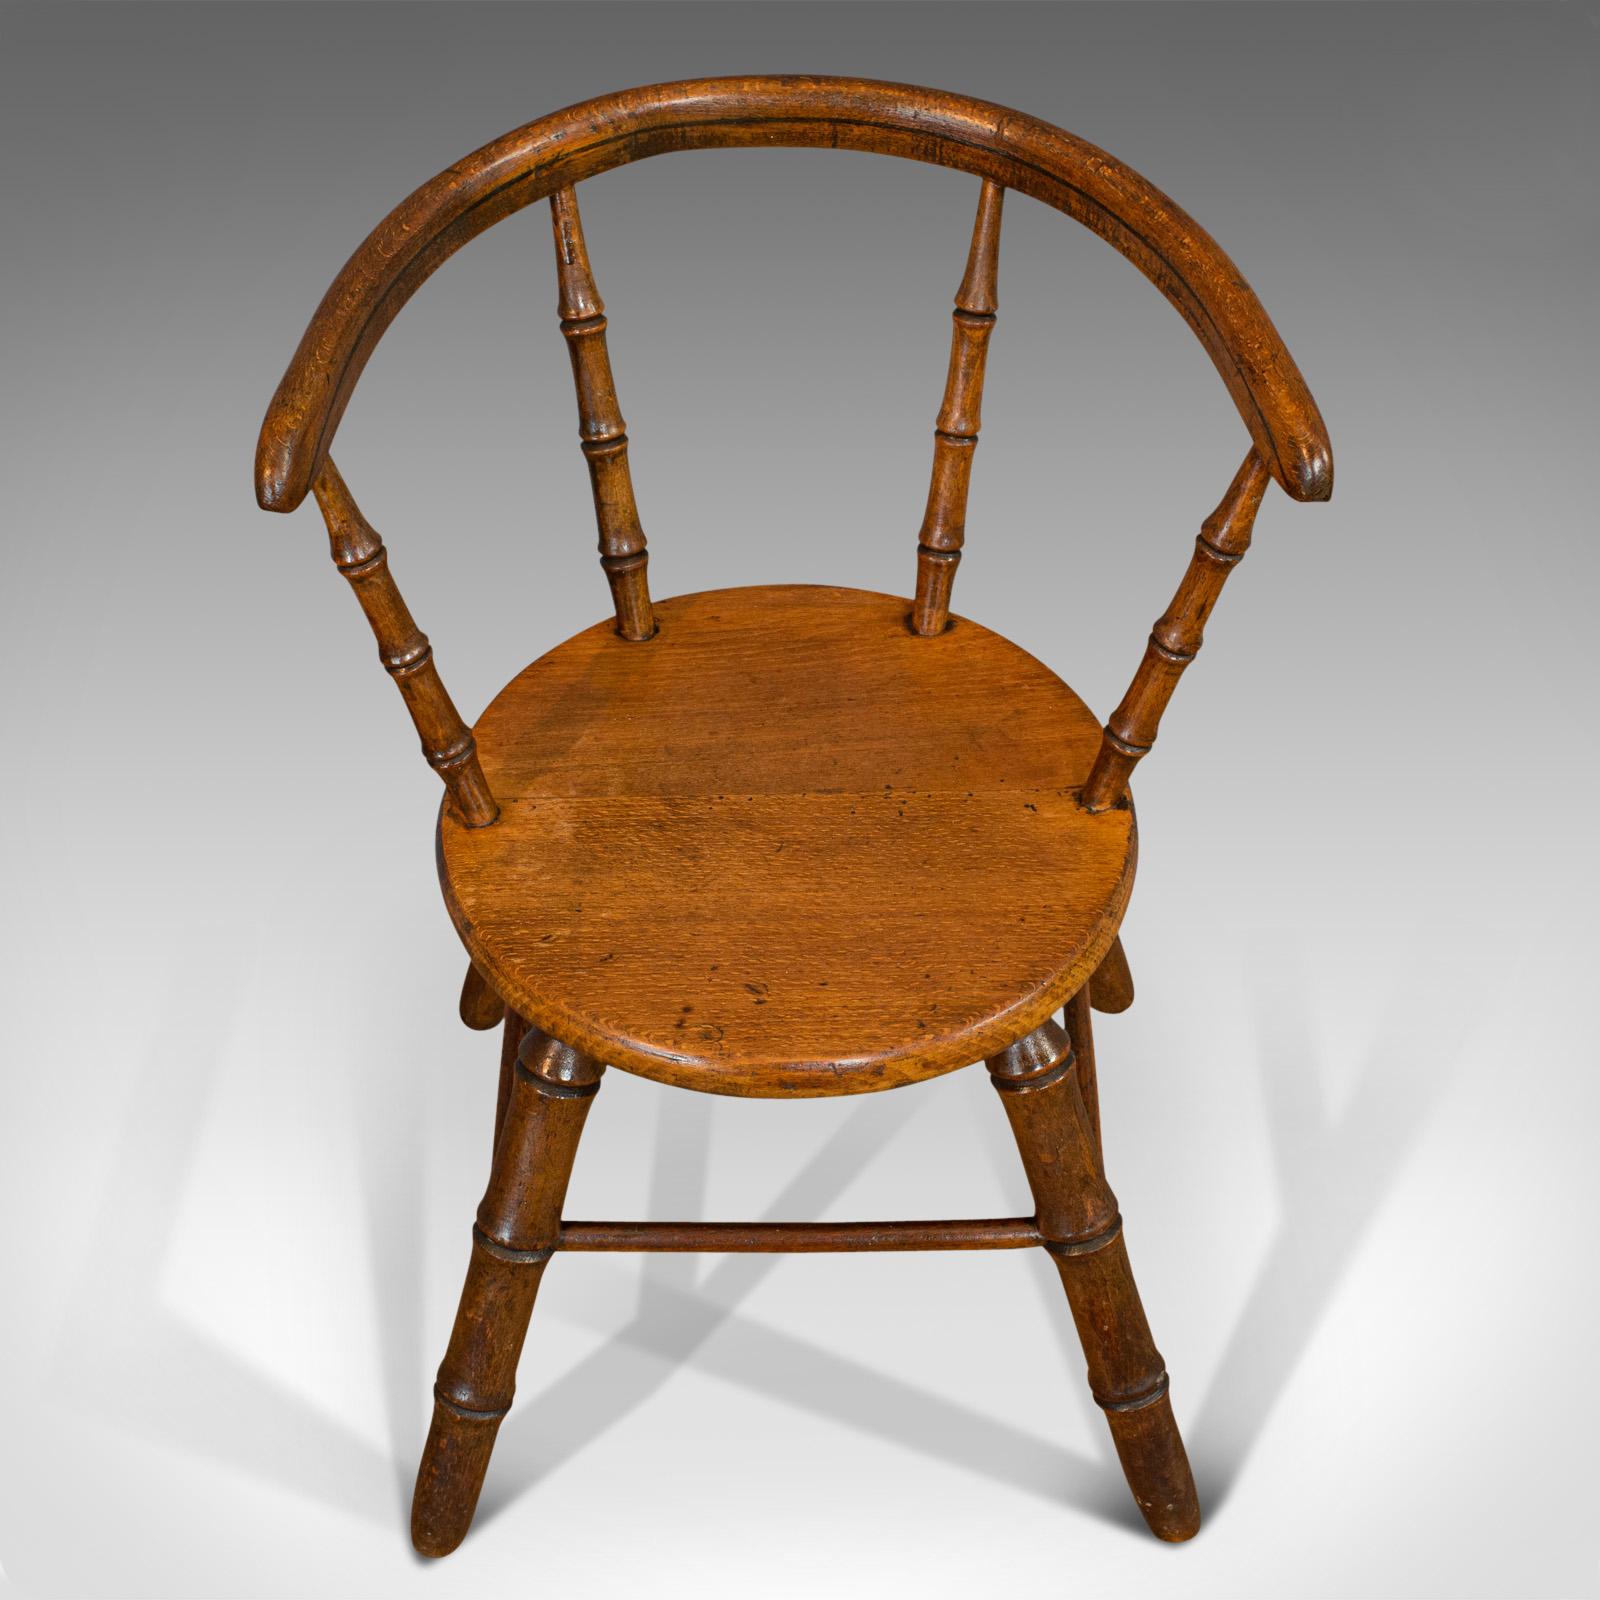 Small Antique Windsor Chair, English, Oak, Apprentice, High Wycombe, Victorian In Good Condition For Sale In Hele, Devon, GB